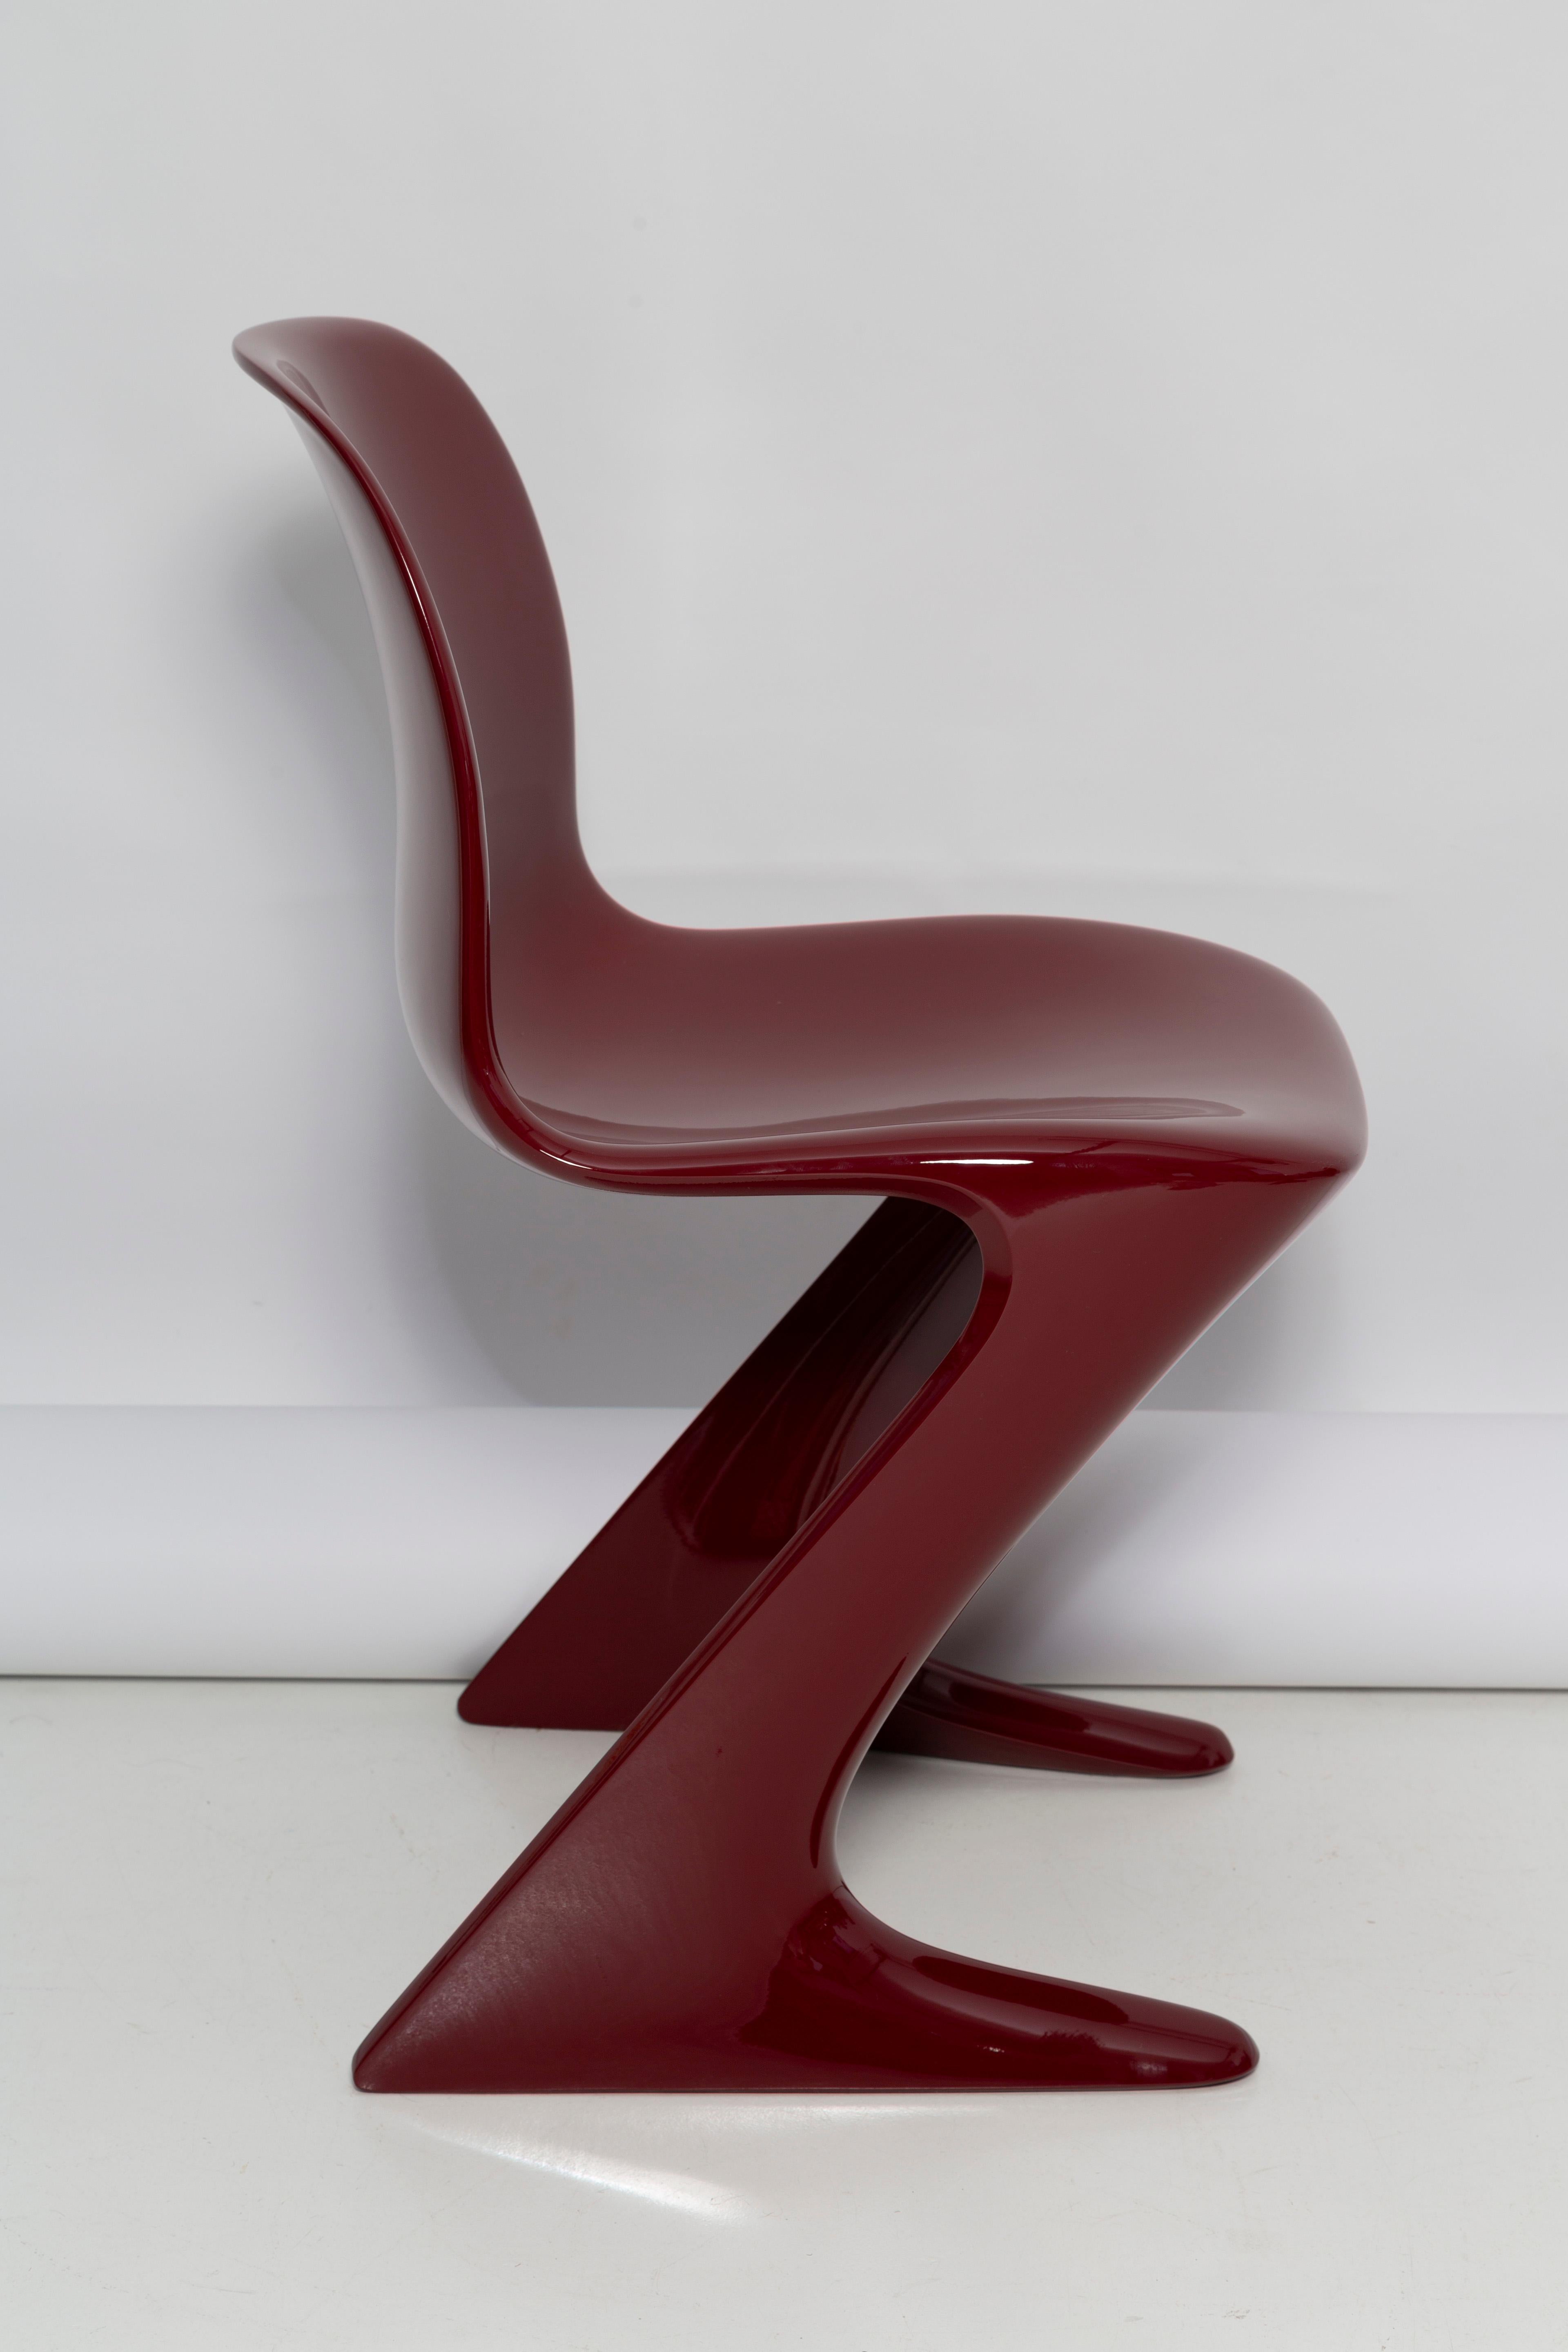 Fiberglass Set of Three Red Wine Kangaroo Chairs Designed by Ernst Moeckl, Germany, 1968 For Sale